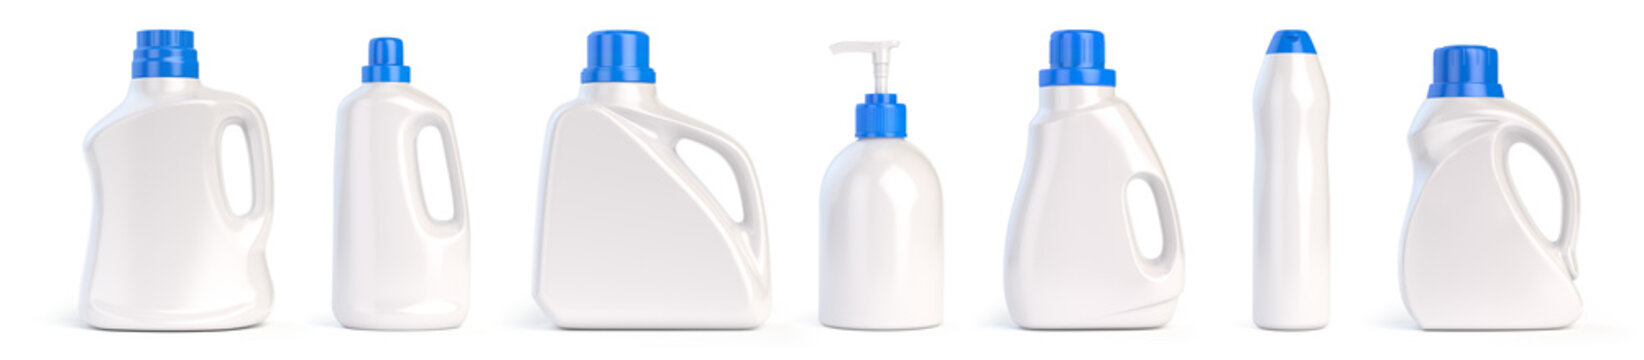 Set of detergent plastic bottles with chemical cleaning product isolated on white background.